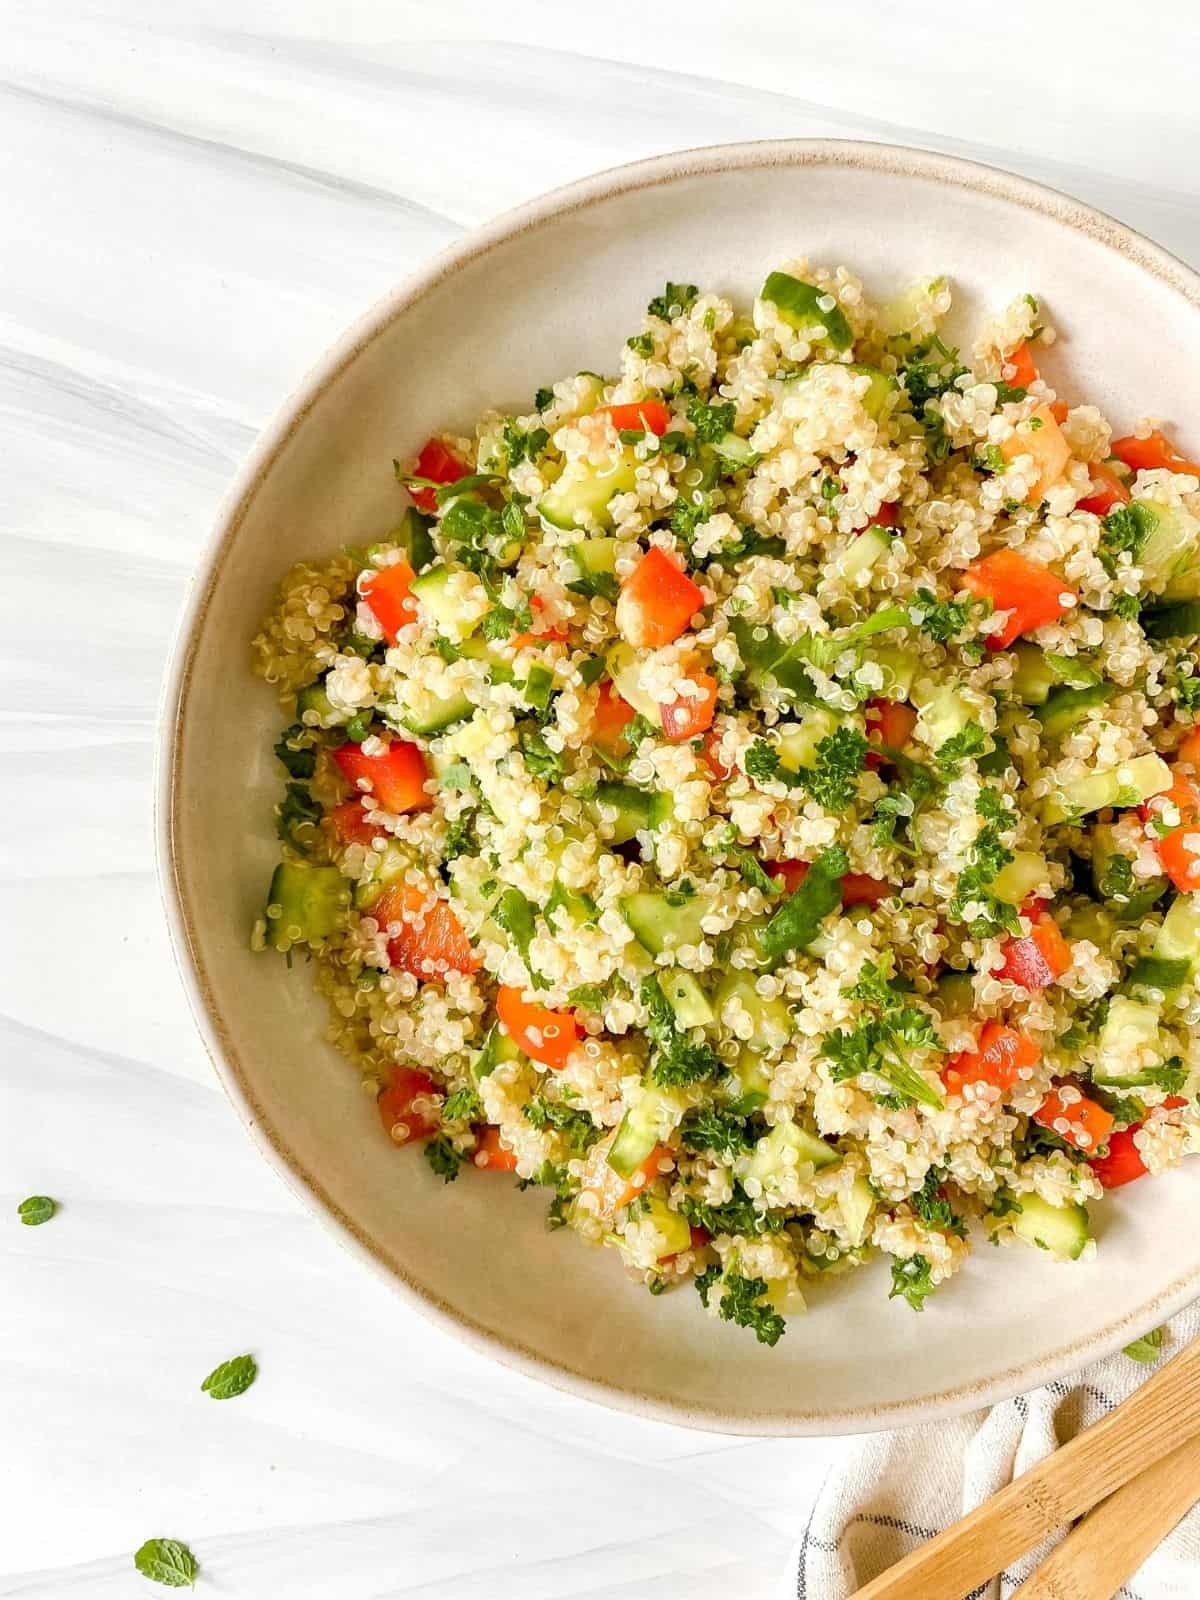 quinoa tabbouleh without tomatoes in a brown dish with herbs next to it.